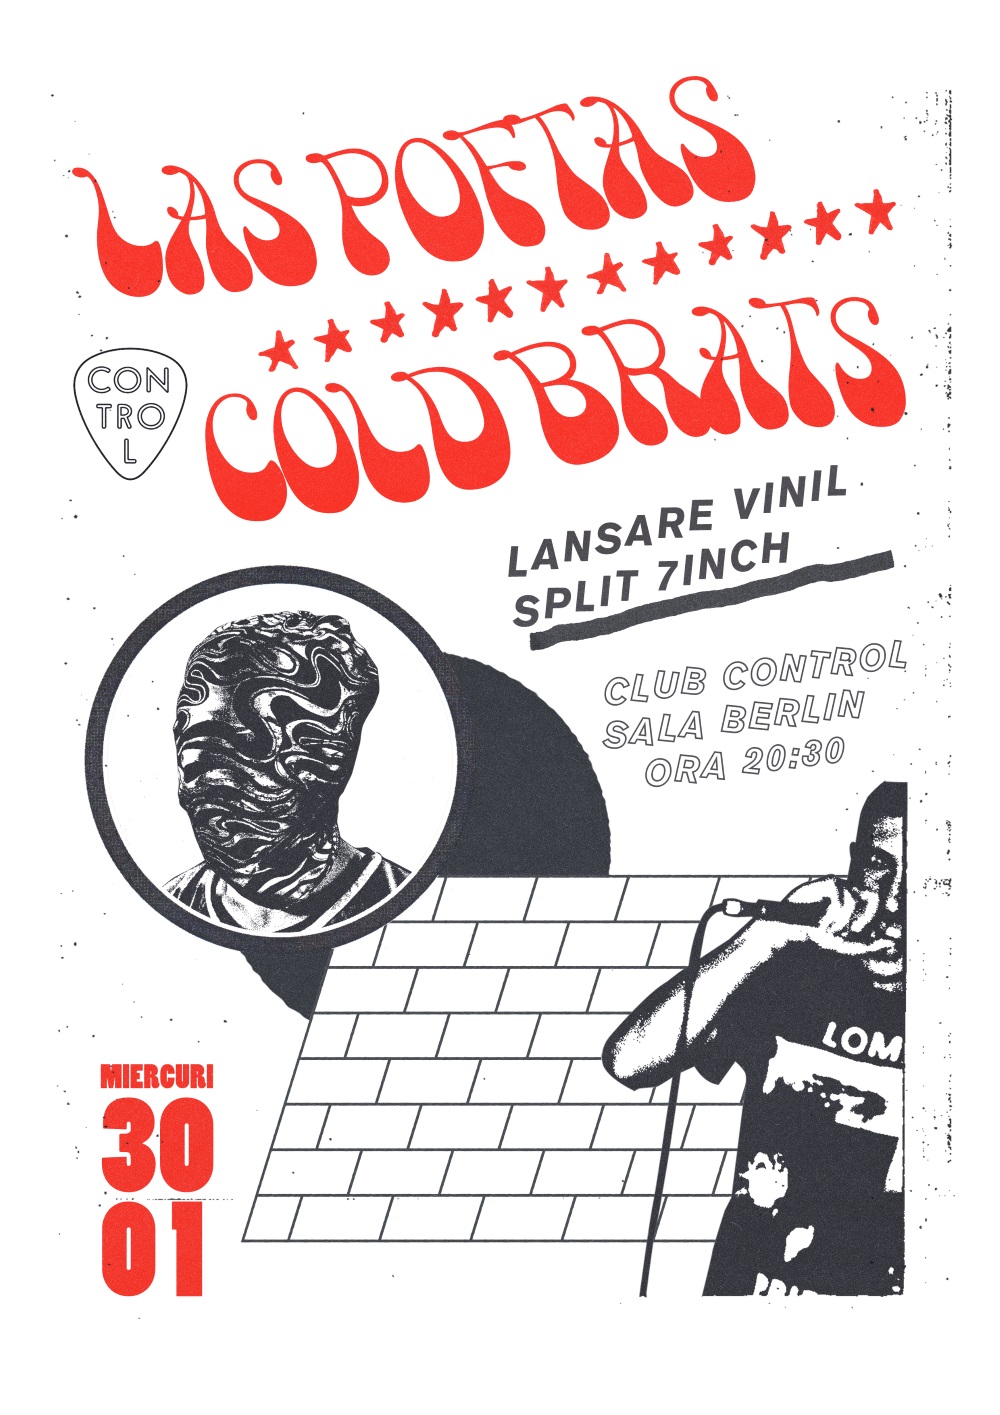 COLD BRATS release show